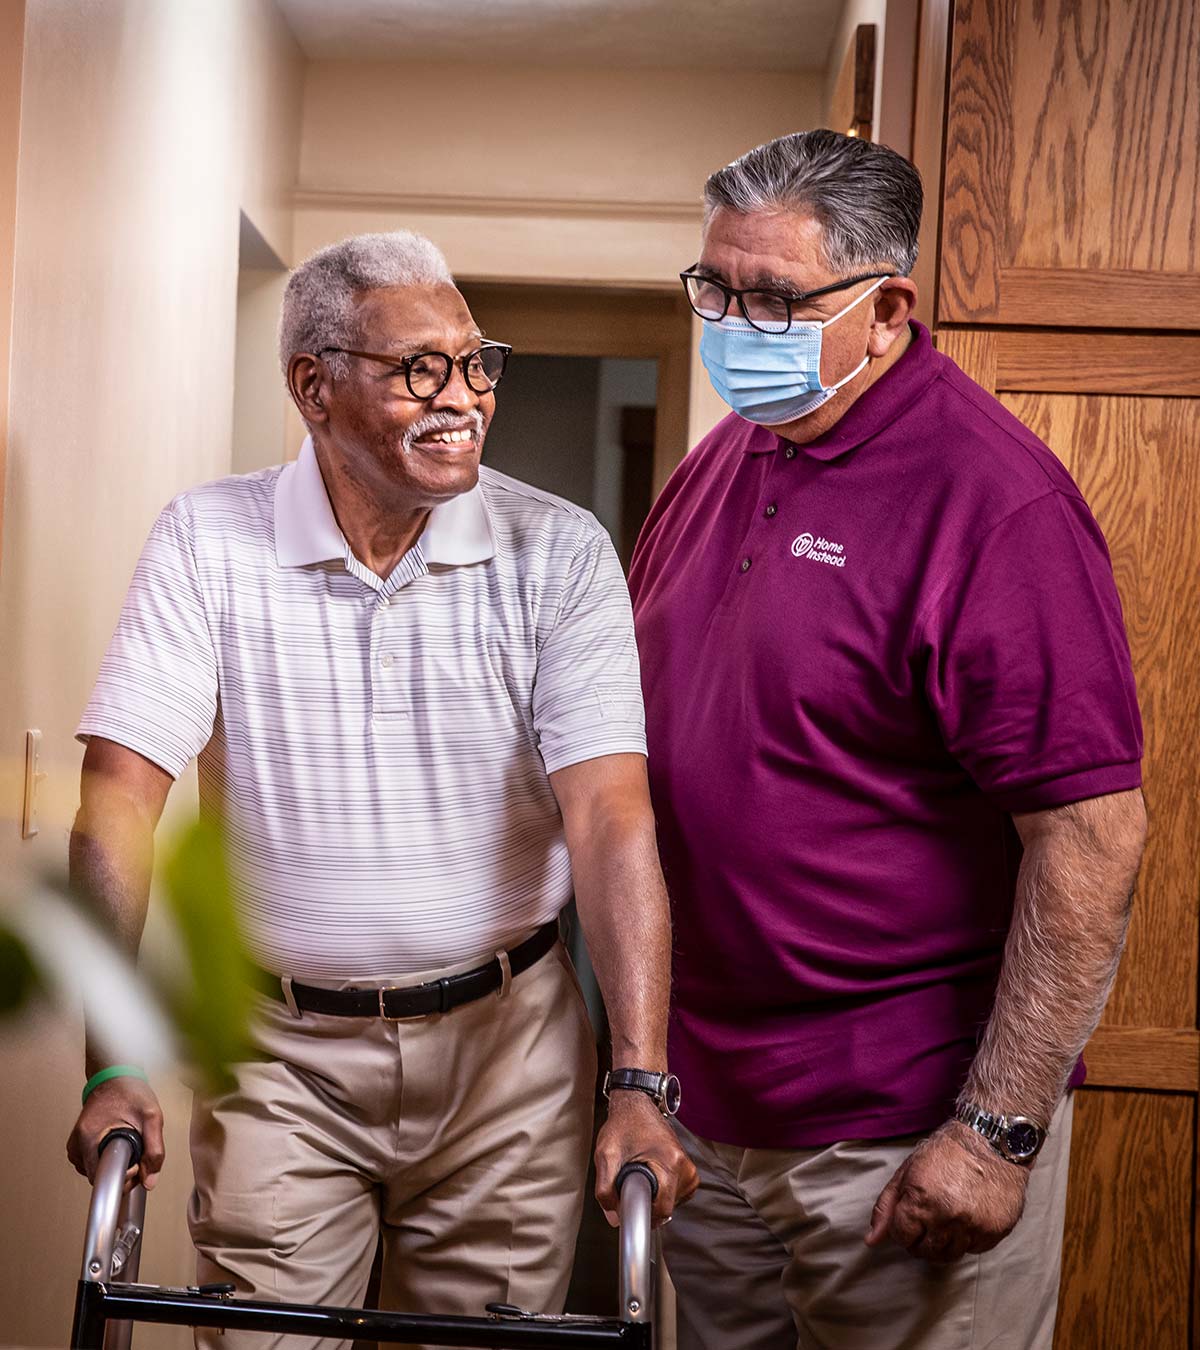 Home Instead Caregiver helps senior man with walker at home in our home care service area